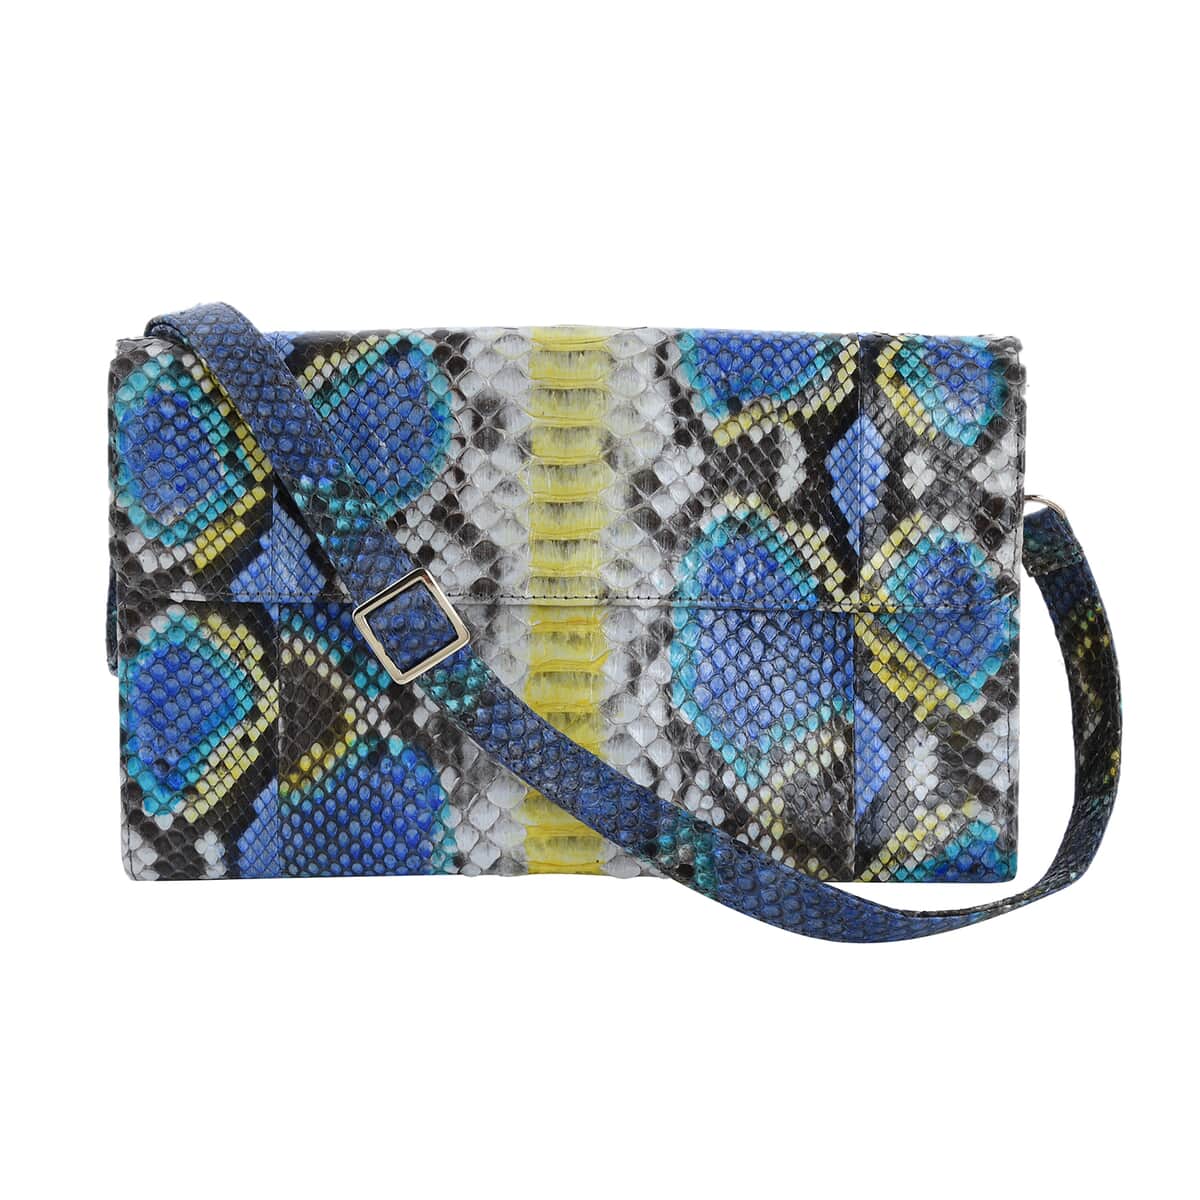 The Pelle Collection Peacock Blue Python Leather Evening Clutch Bag with Detachable Strap, Clutches for Women, Leather Handbag, Clutch Purse image number 0